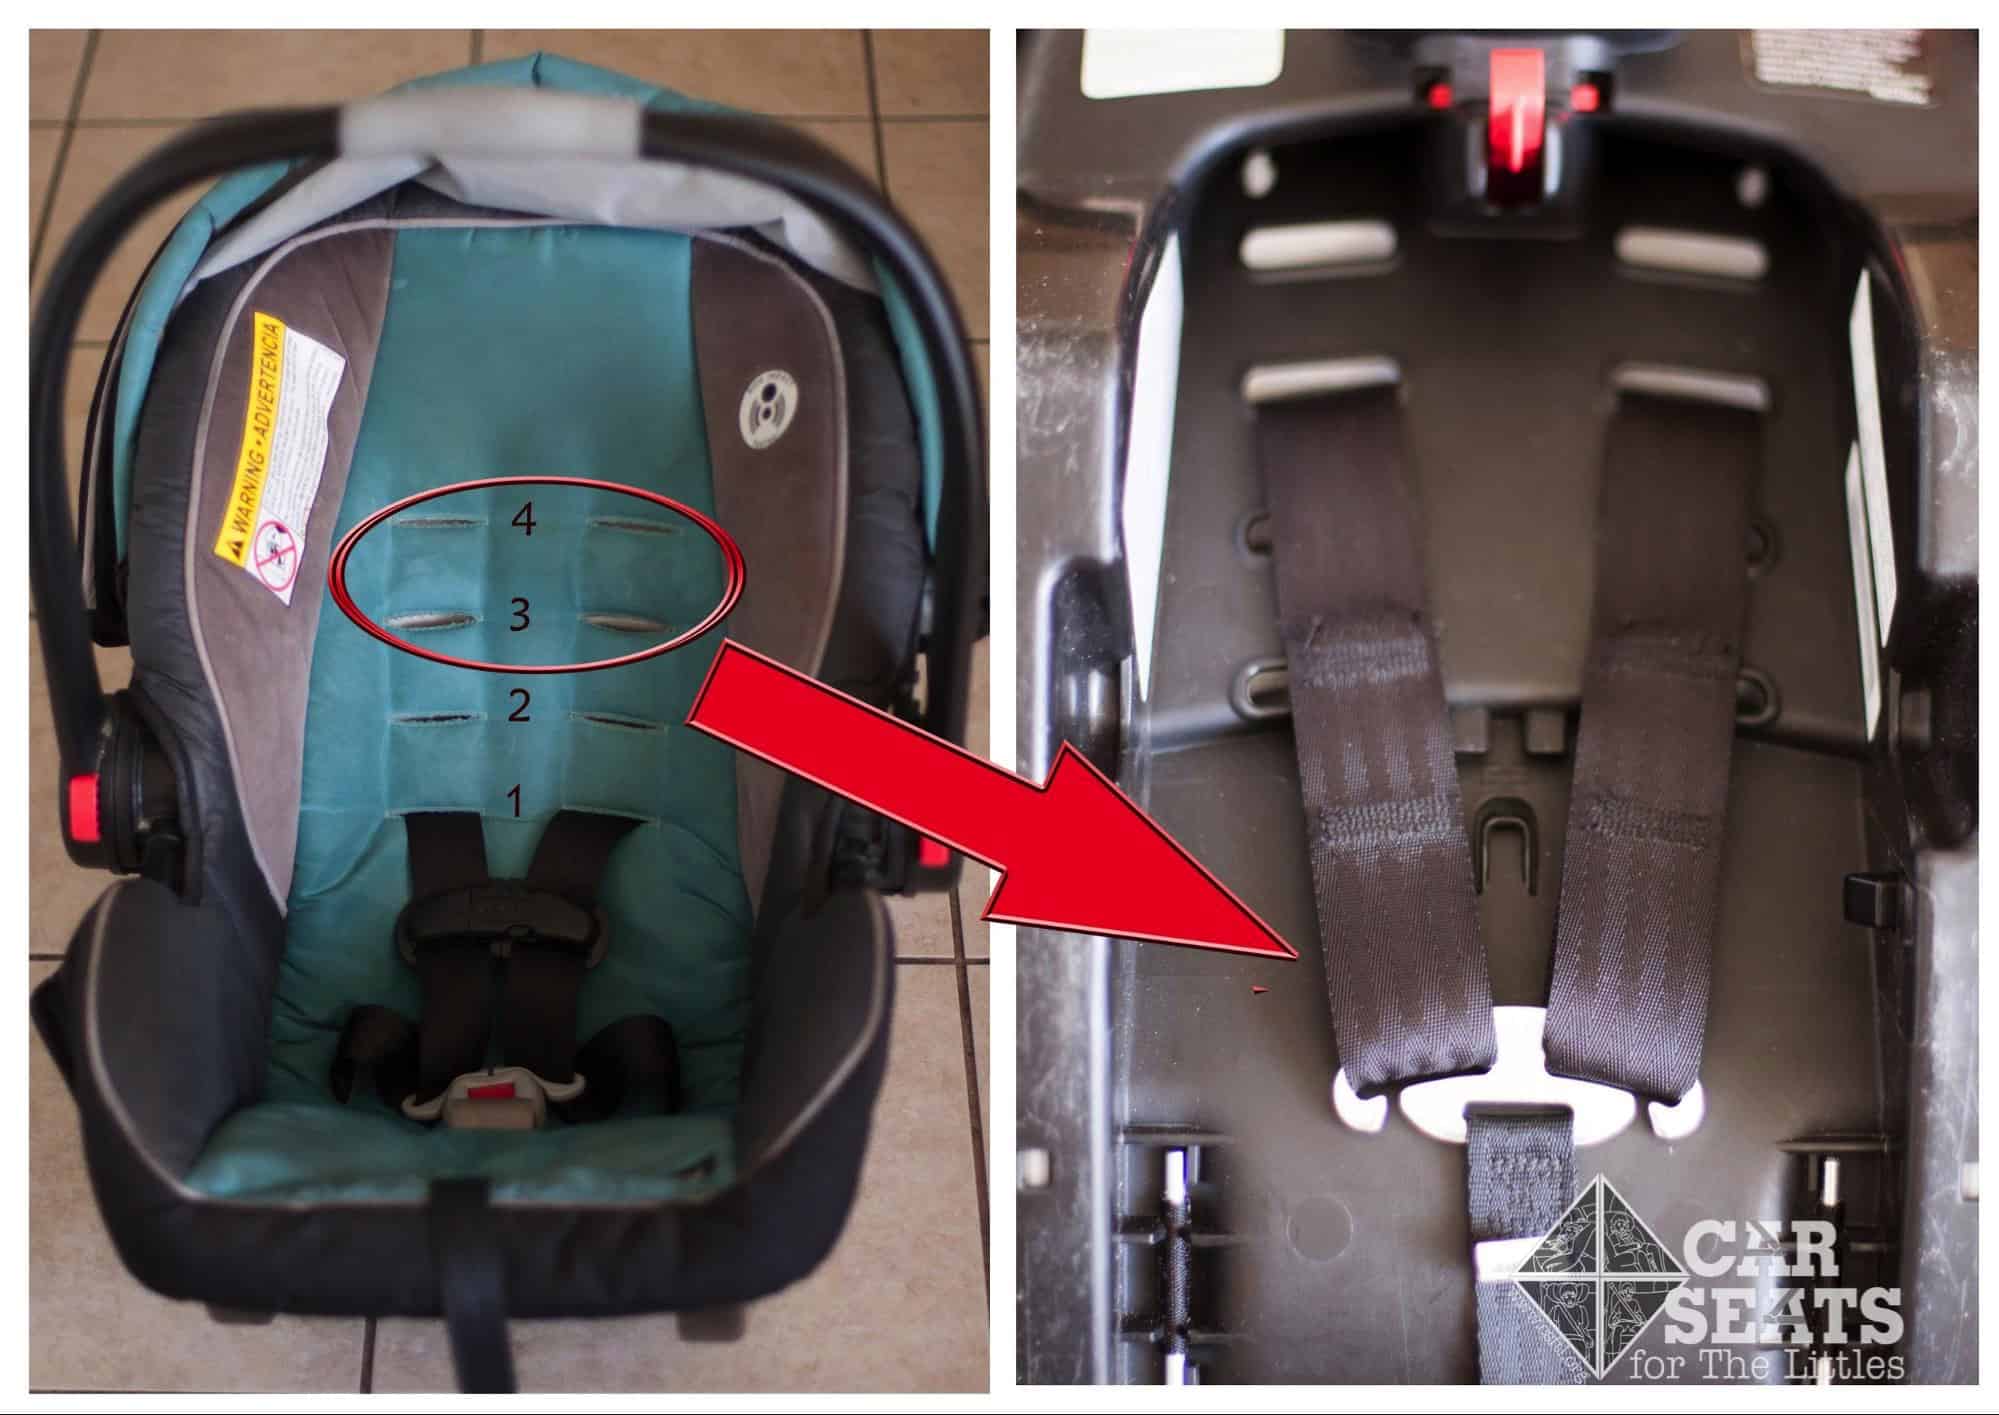 How Do You Adjust the Straps on a Graco Car Seat?